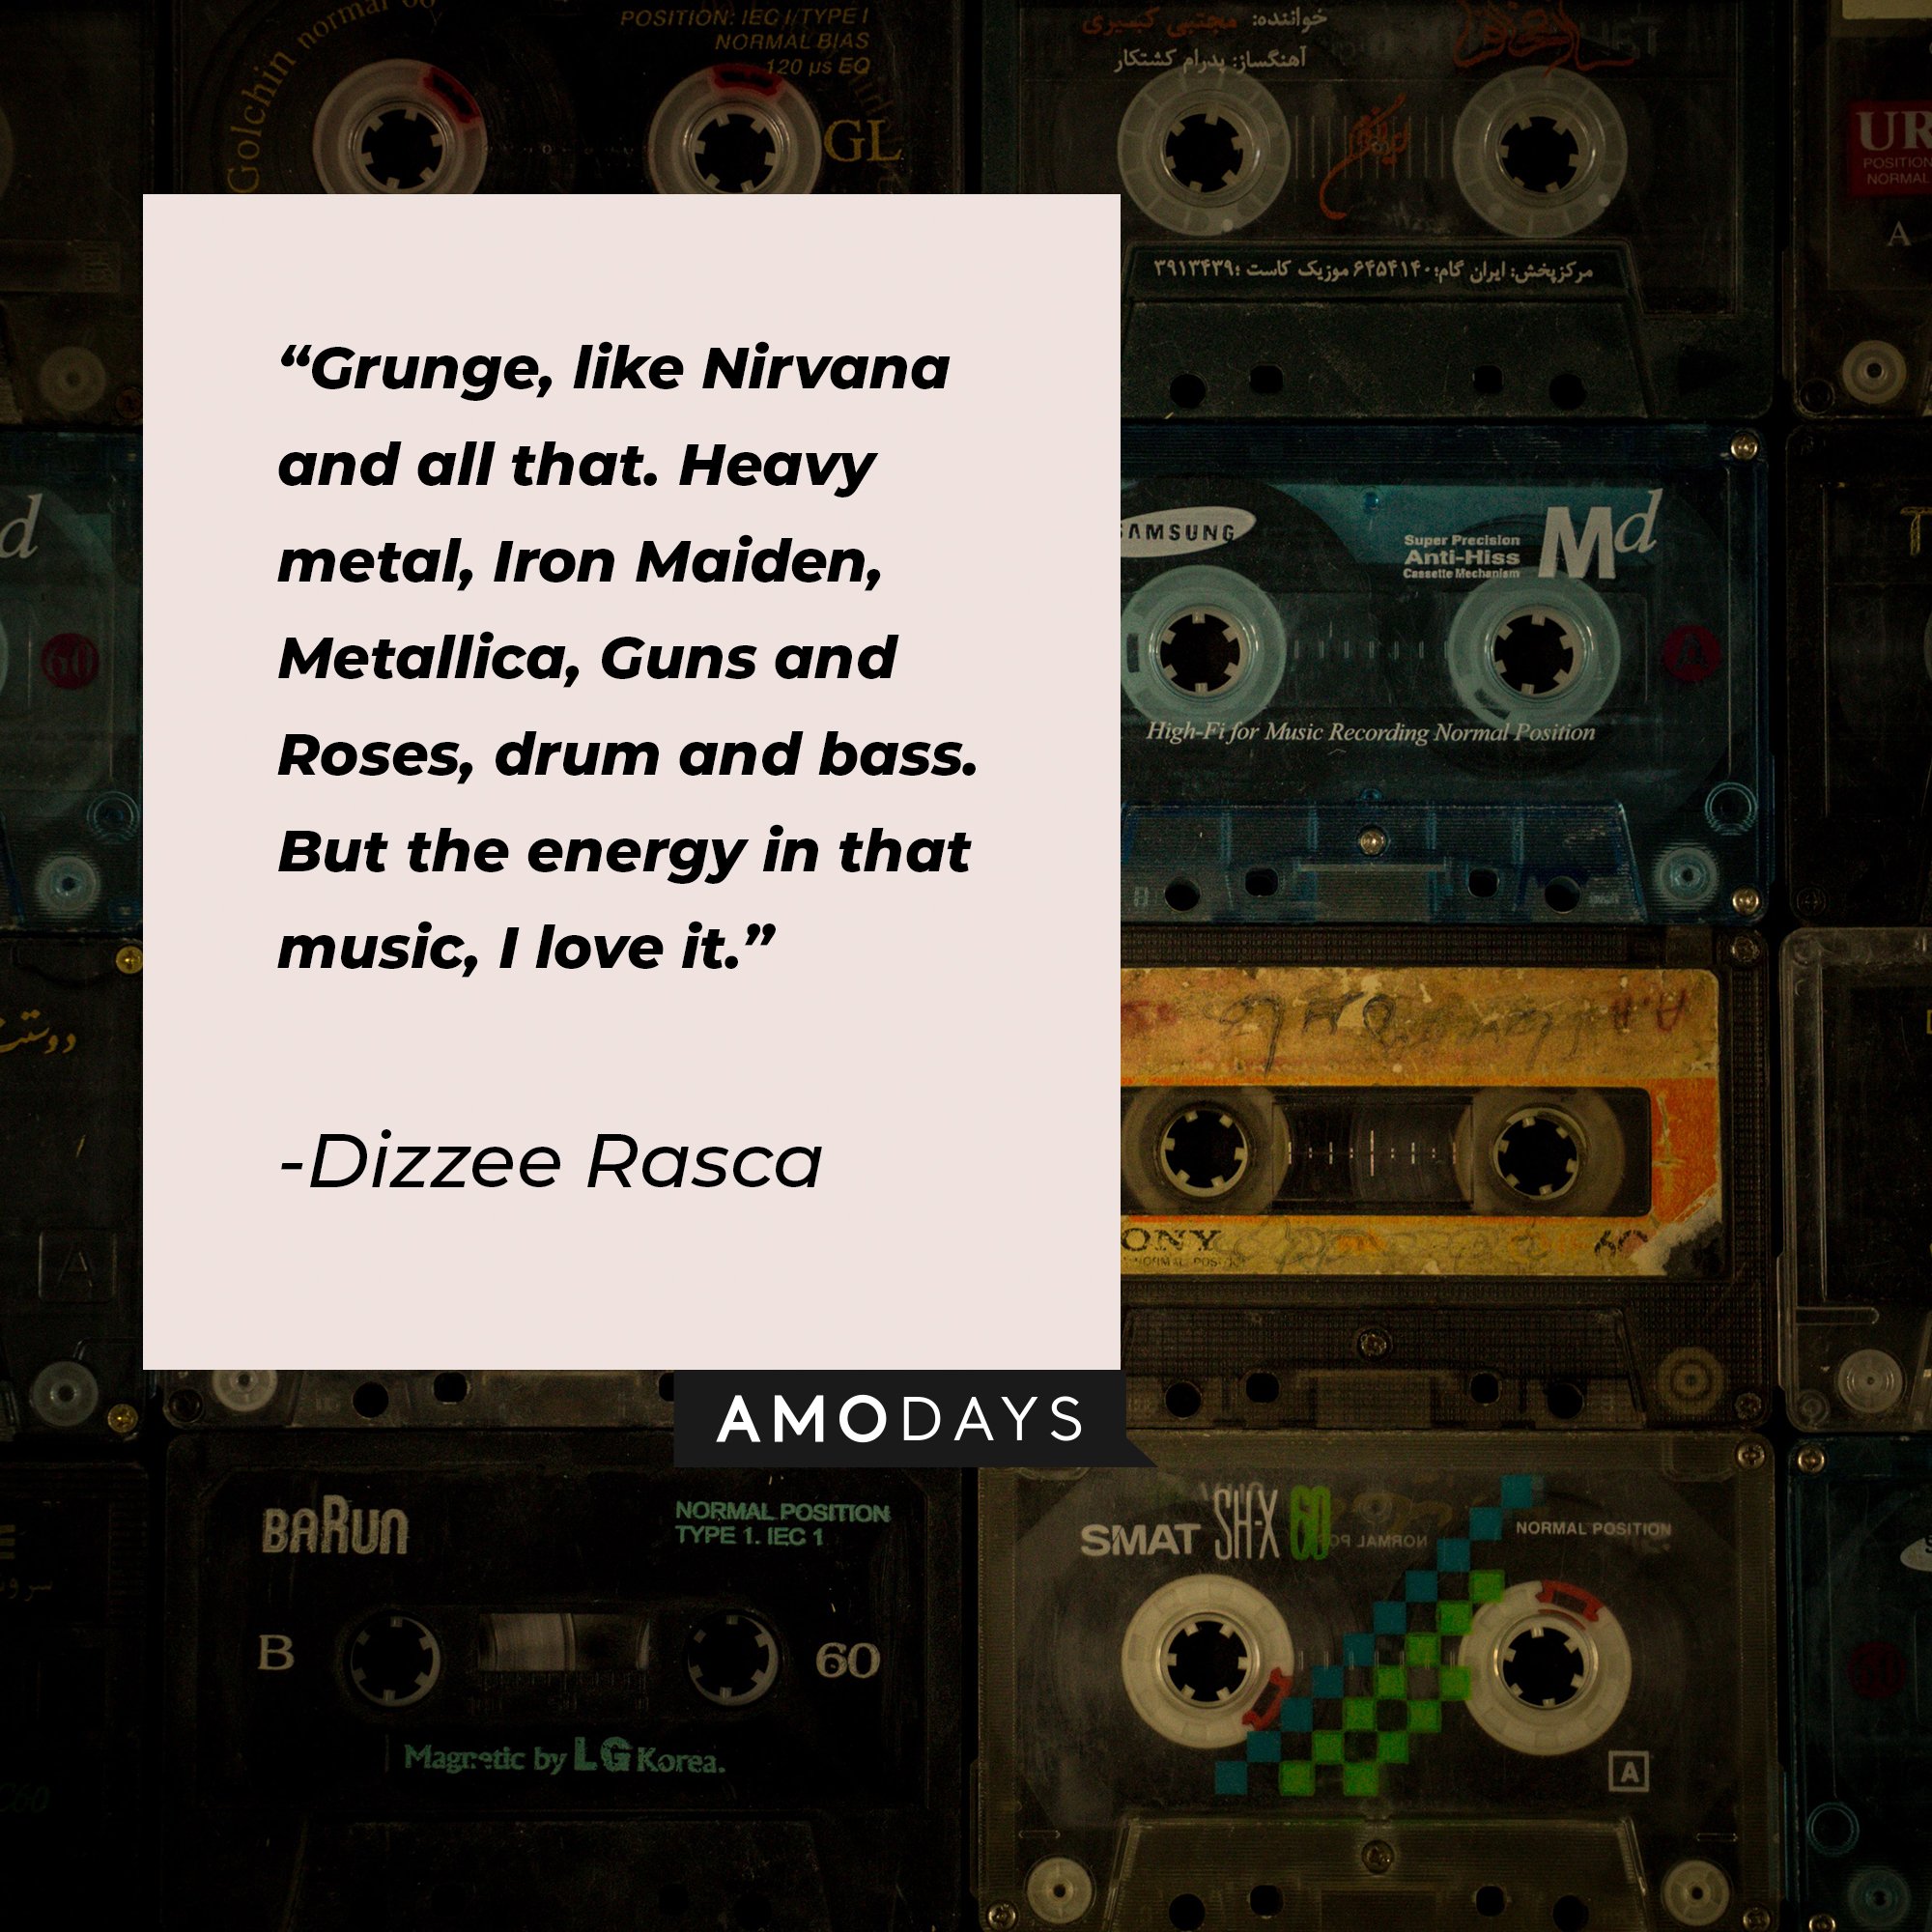 Dizzee Rascal’s quote: "Grunge, like Nirvana and all that. Heavy metal, Iron Maiden, Metallica, Guns and Roses, drum and bass. But the energy in that music, I love it." | Image: AmoDays  